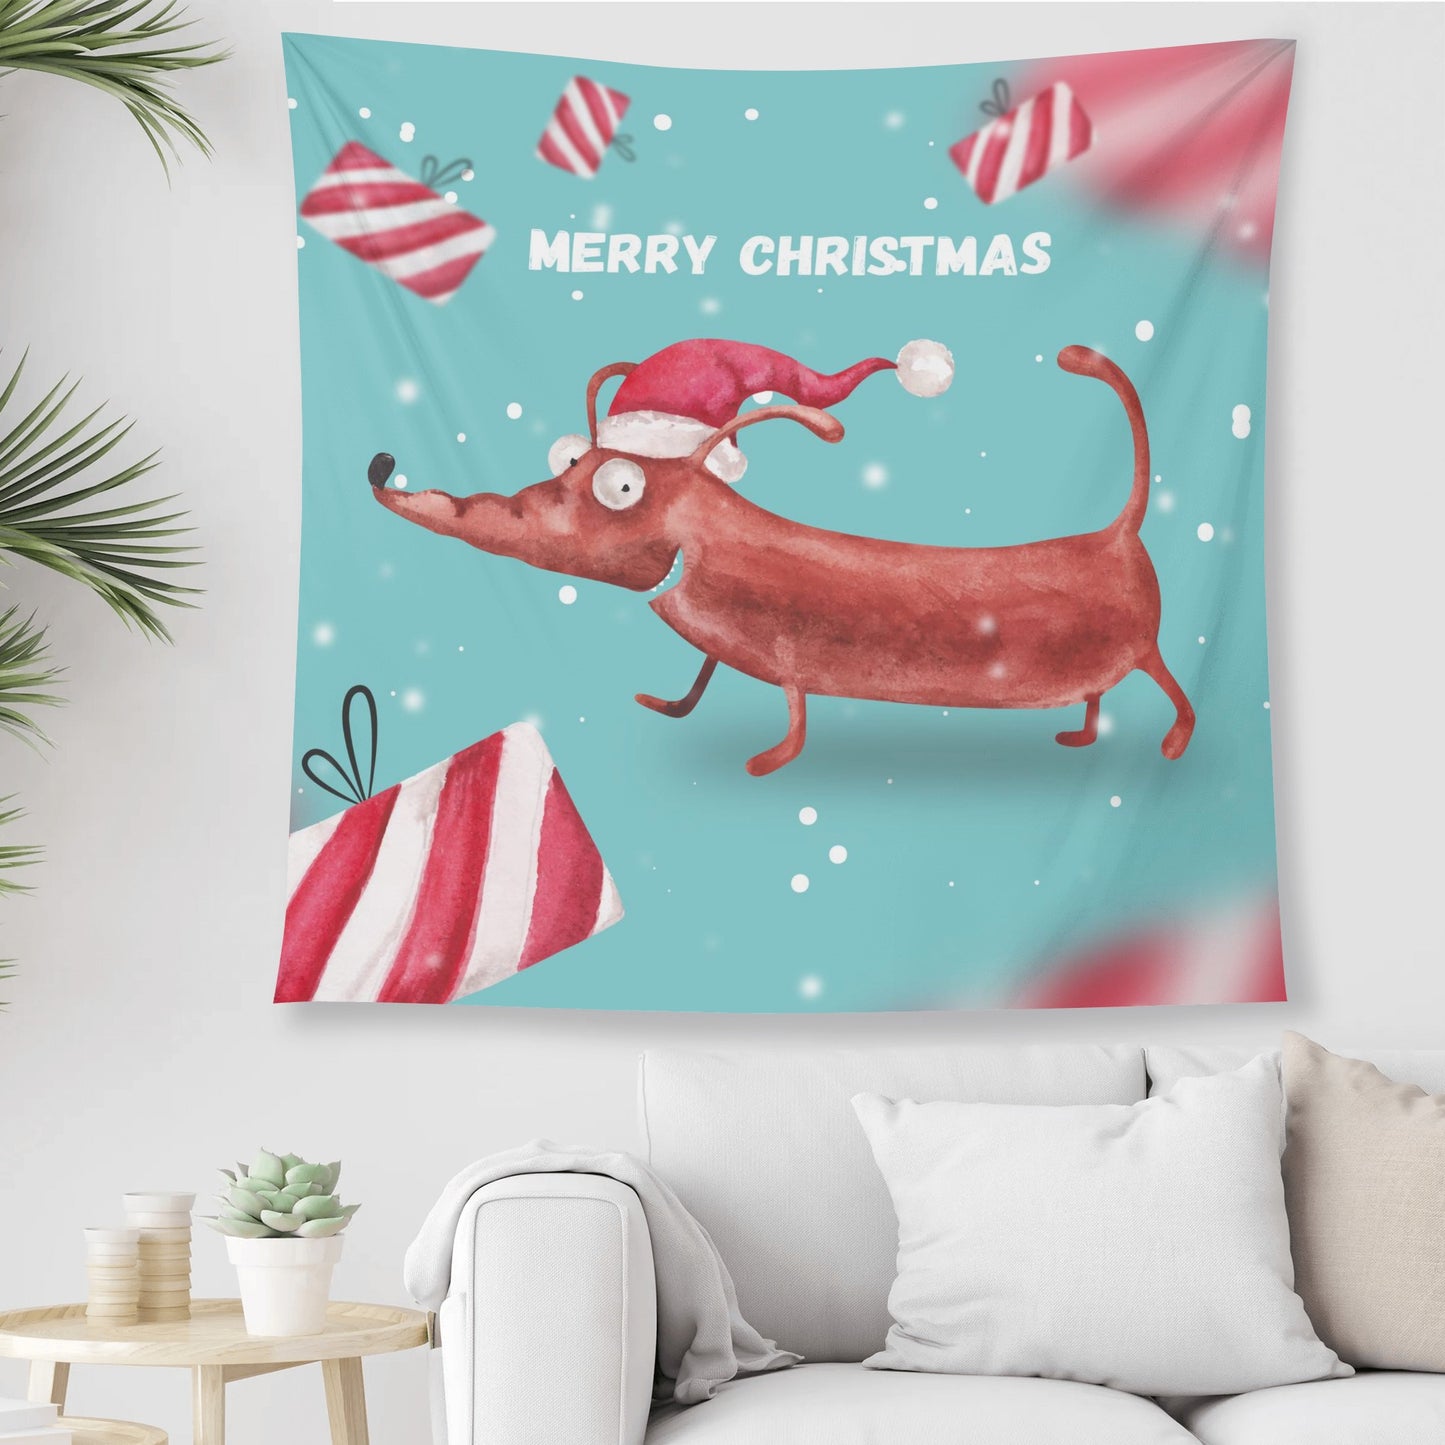 Hot Dog It is Christmas Time Polyester Peach Skin Wall Tapestry 6 Sizes